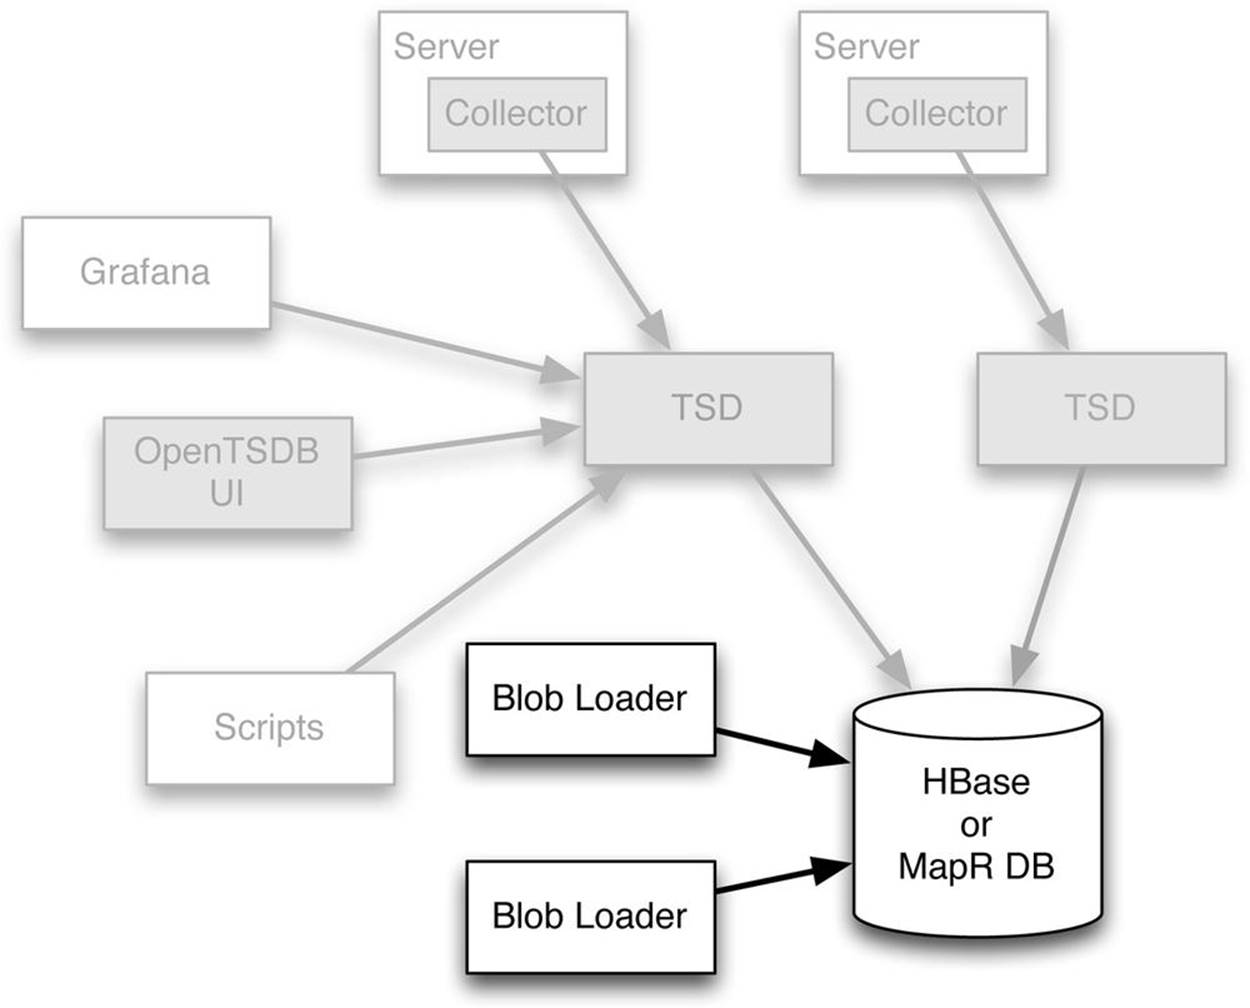 Historical data can be ingested at high speed through direct blob ingenstion by using the blob loader alongside Open TSDB, without needing an in-memory cache. Additional architectural components are shown grayed out here for context.